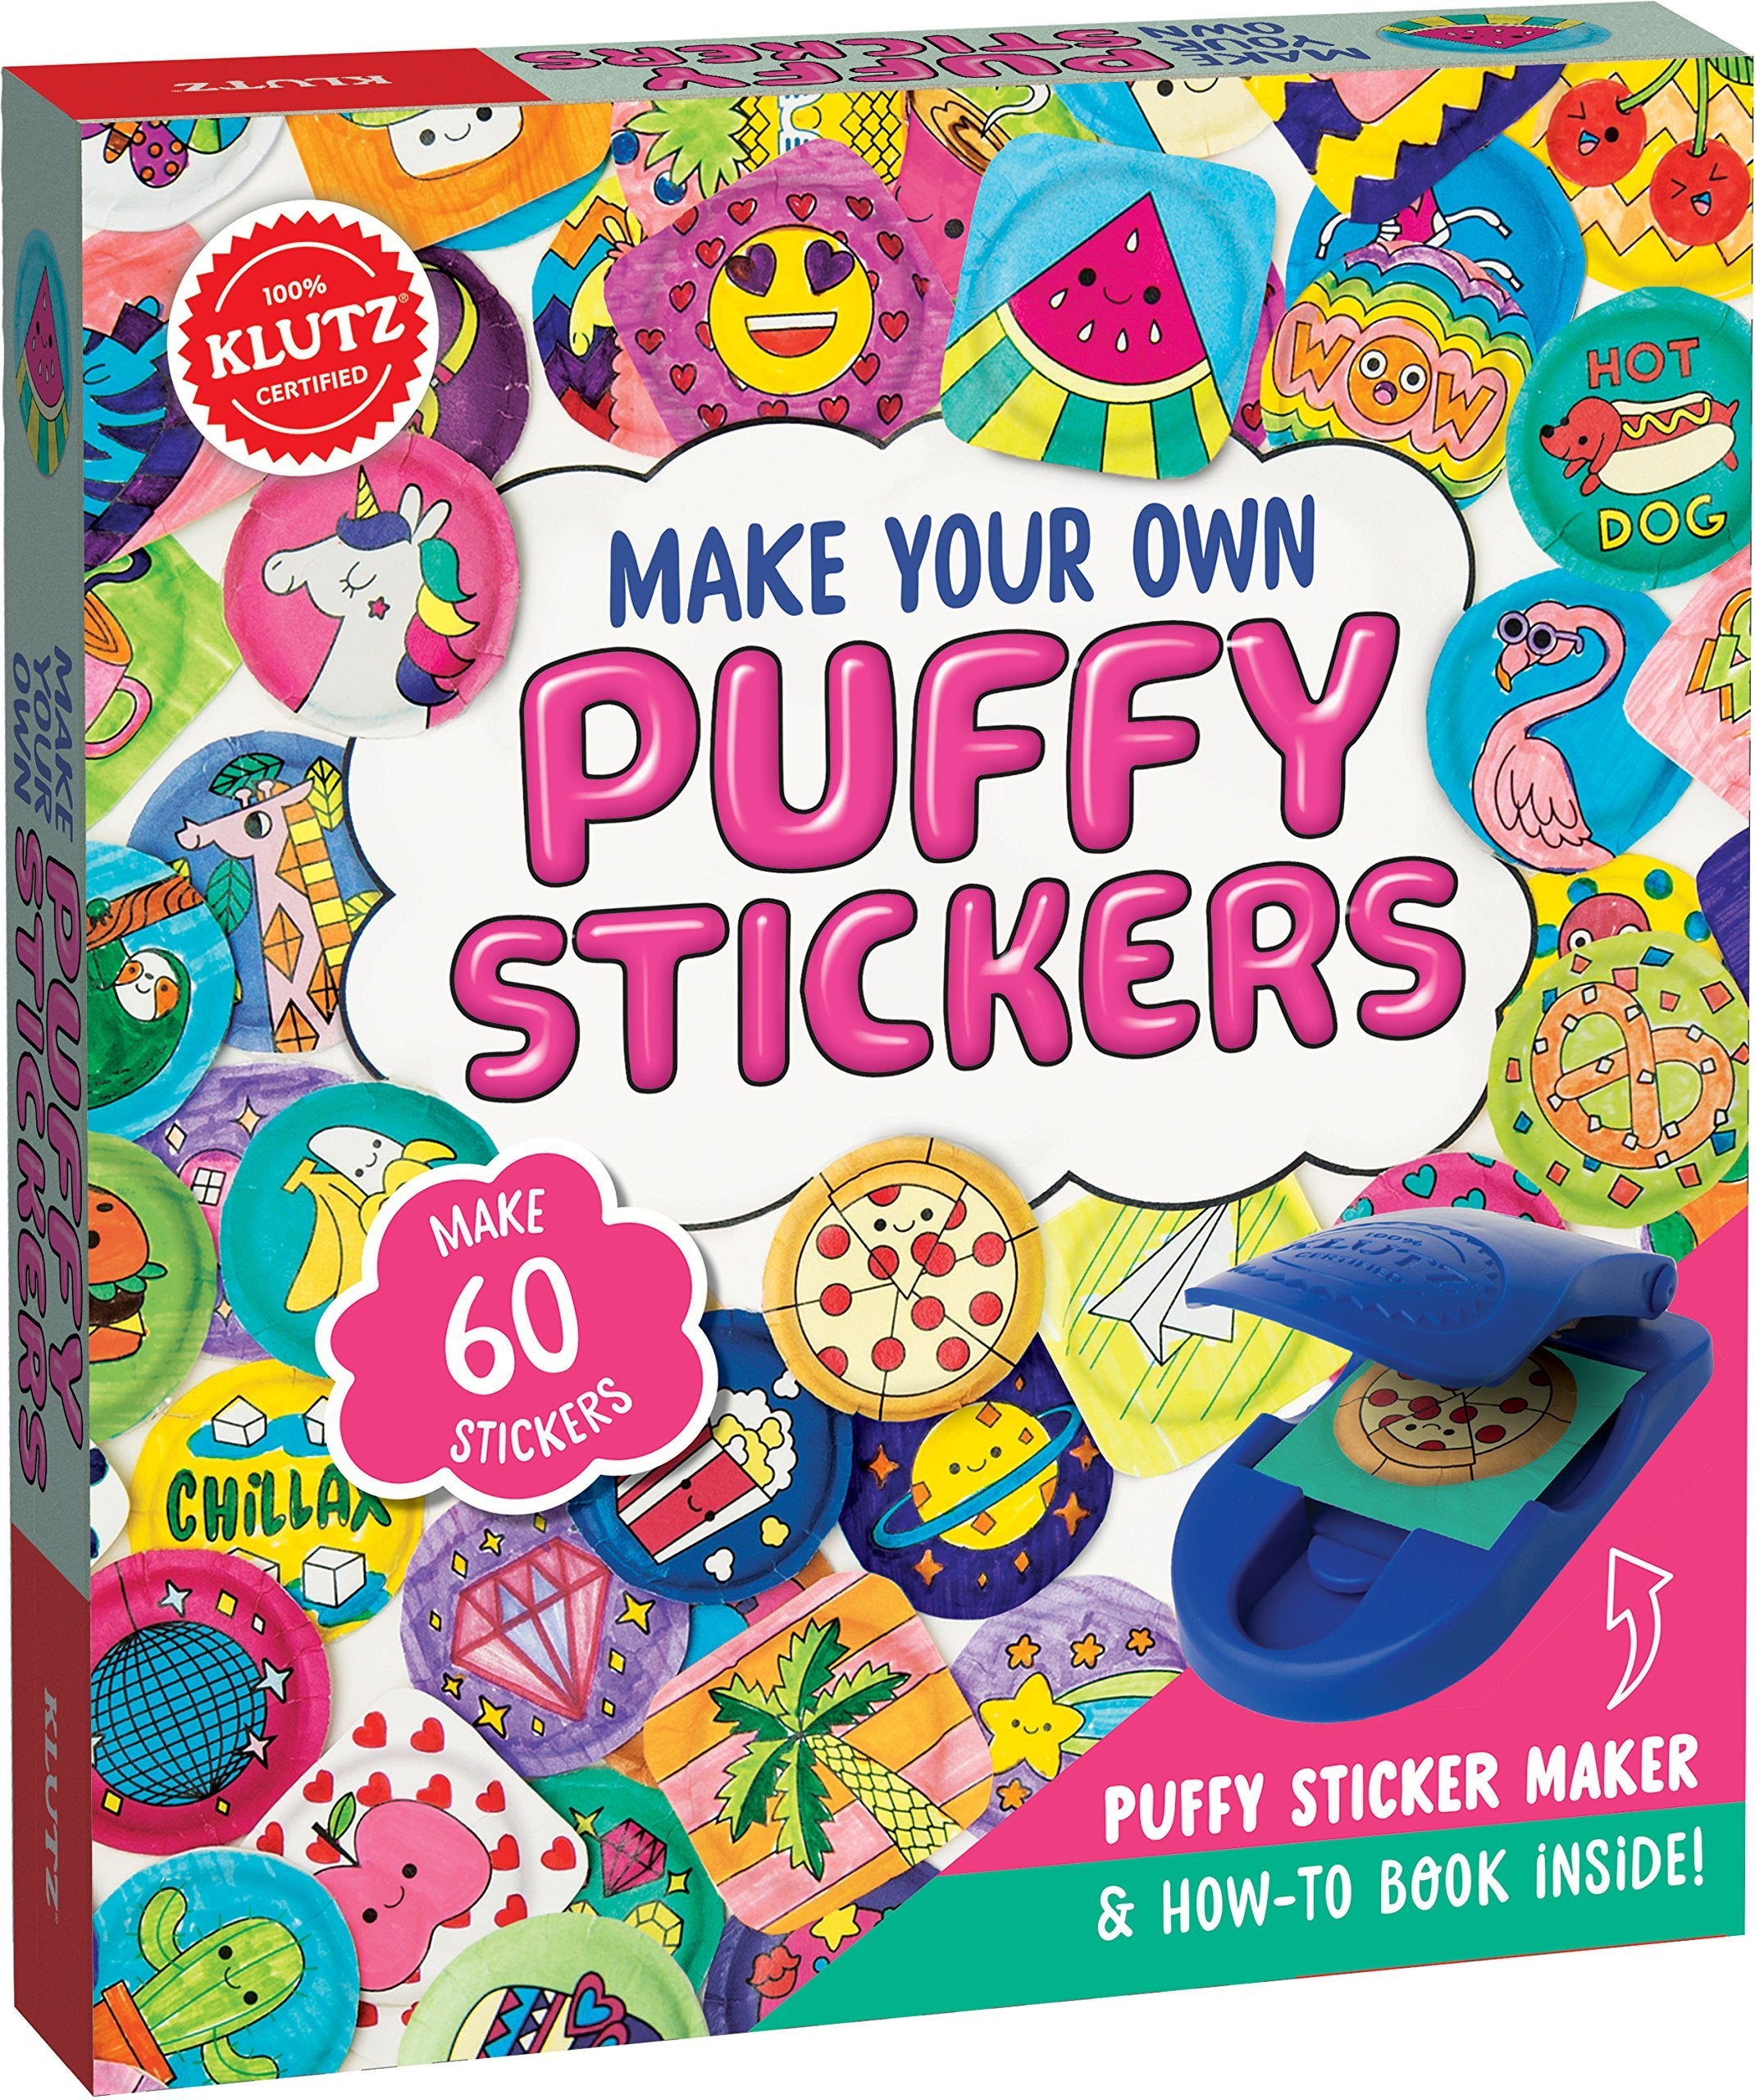 Klutz- Make Your Own Puffy Stickers